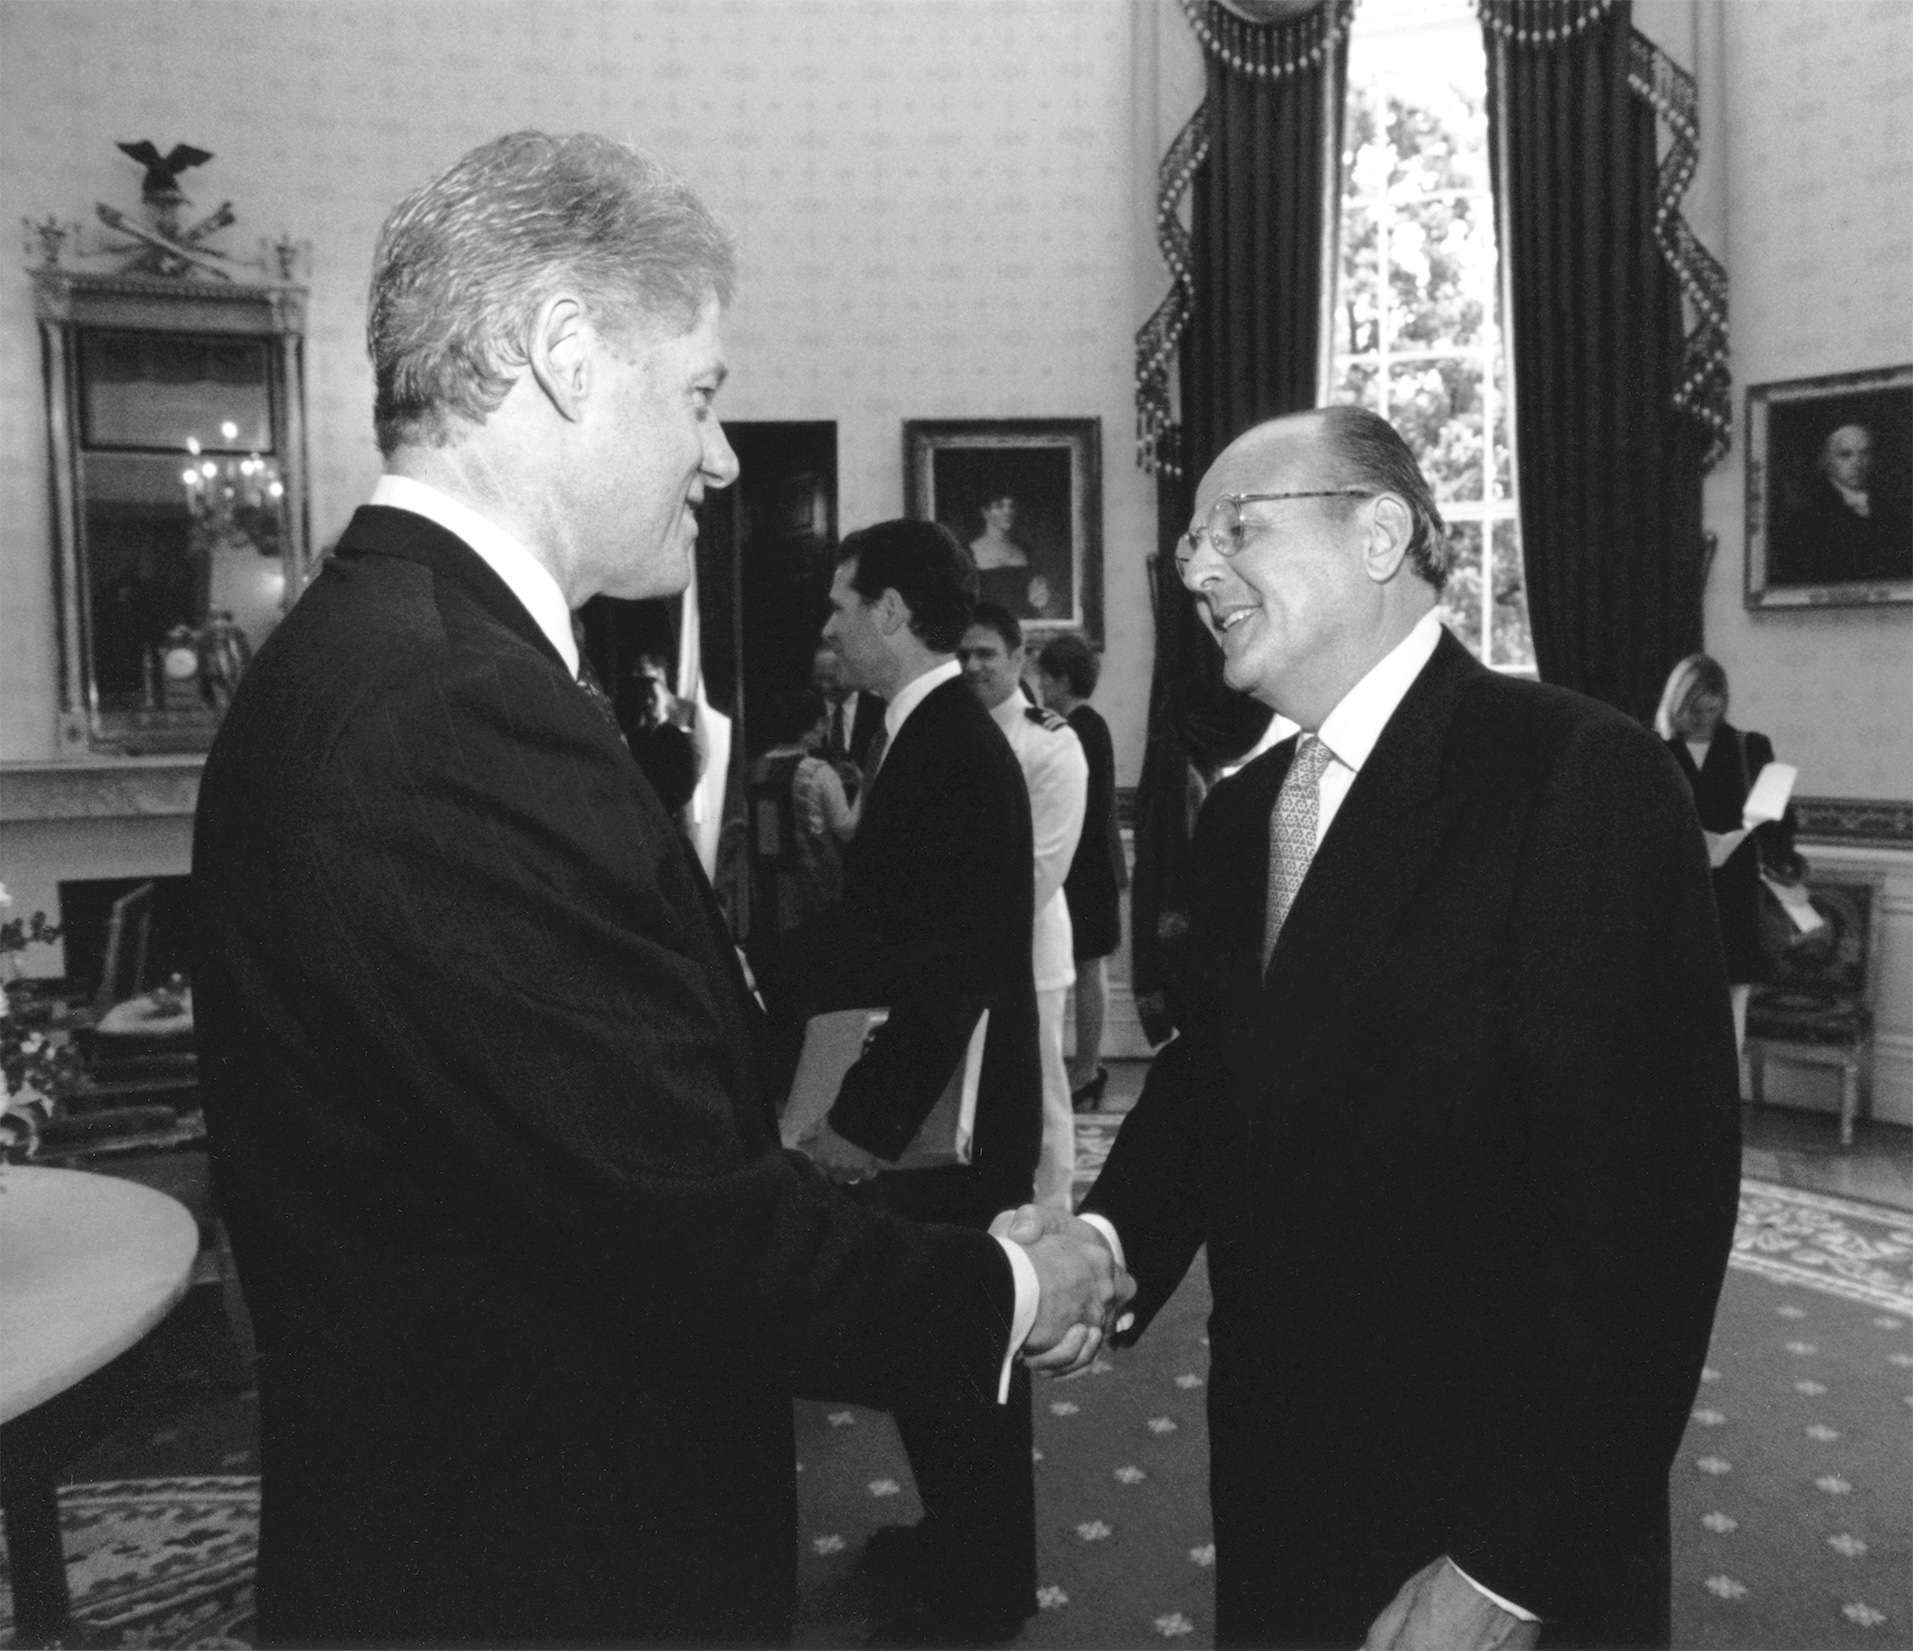 Peter Engel pictured with former President Bill Clinton